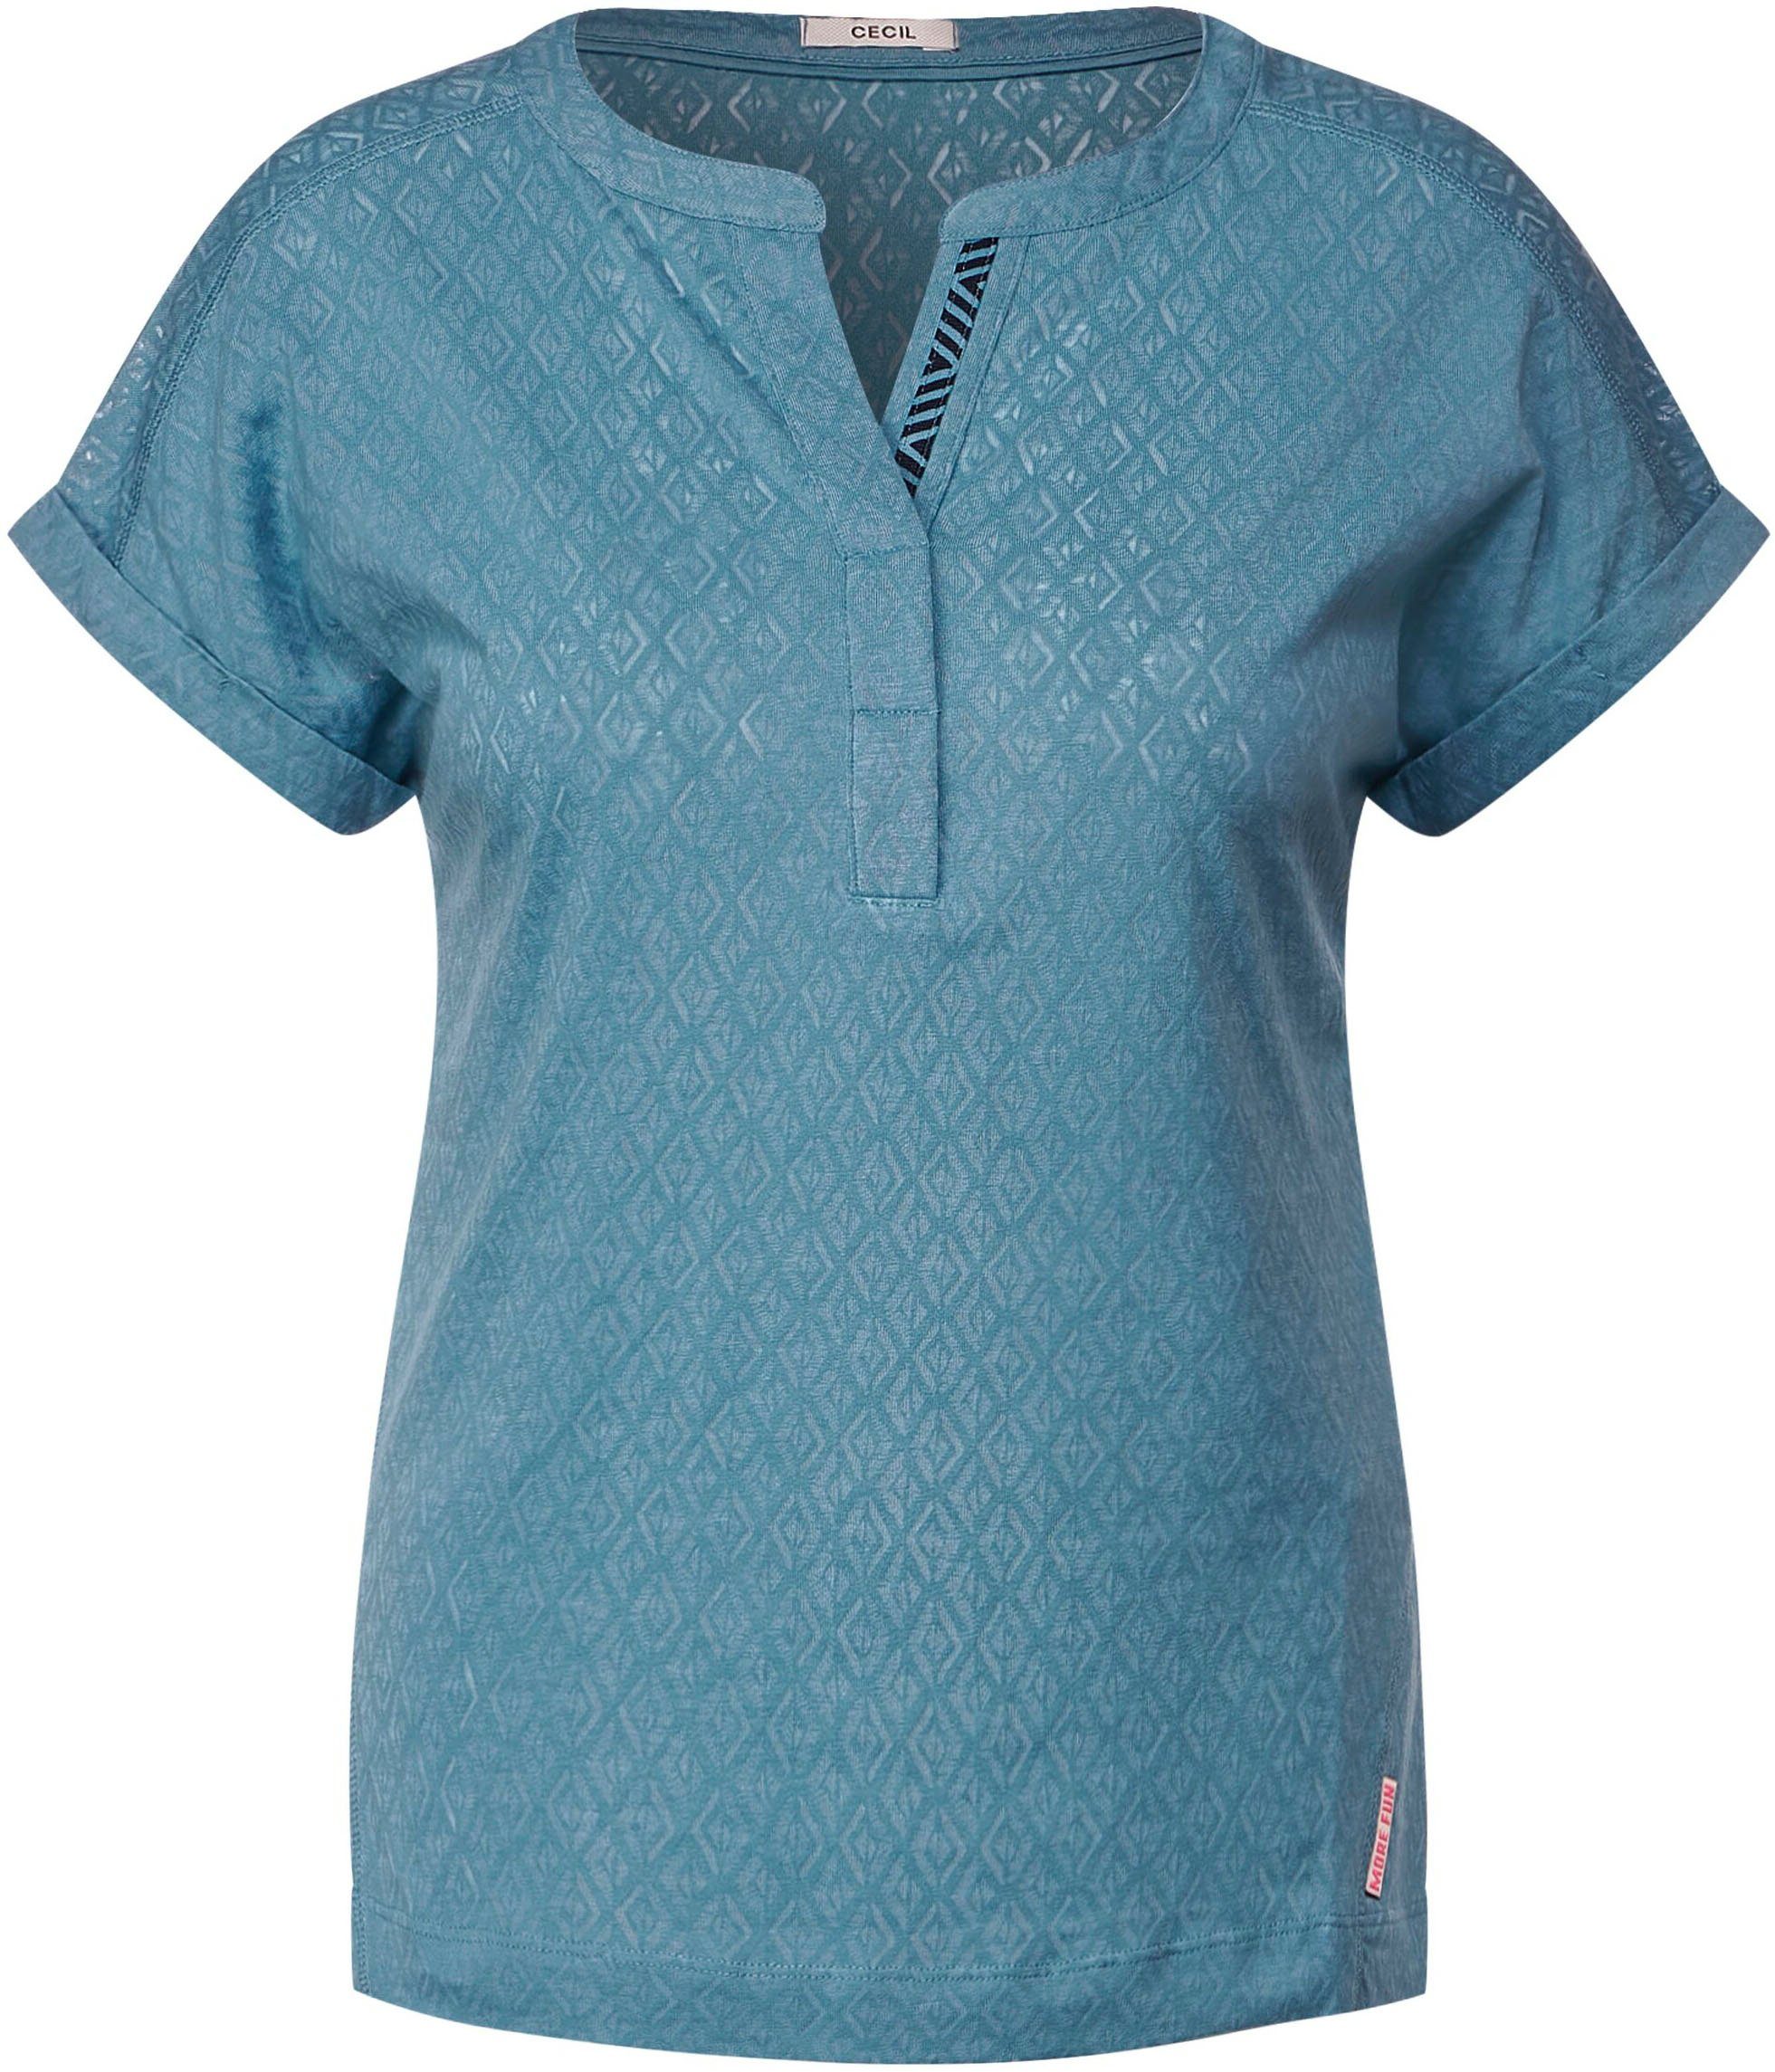 adriatic T-Shirt Allover-Muster Cecil mit in blue Rhombusform